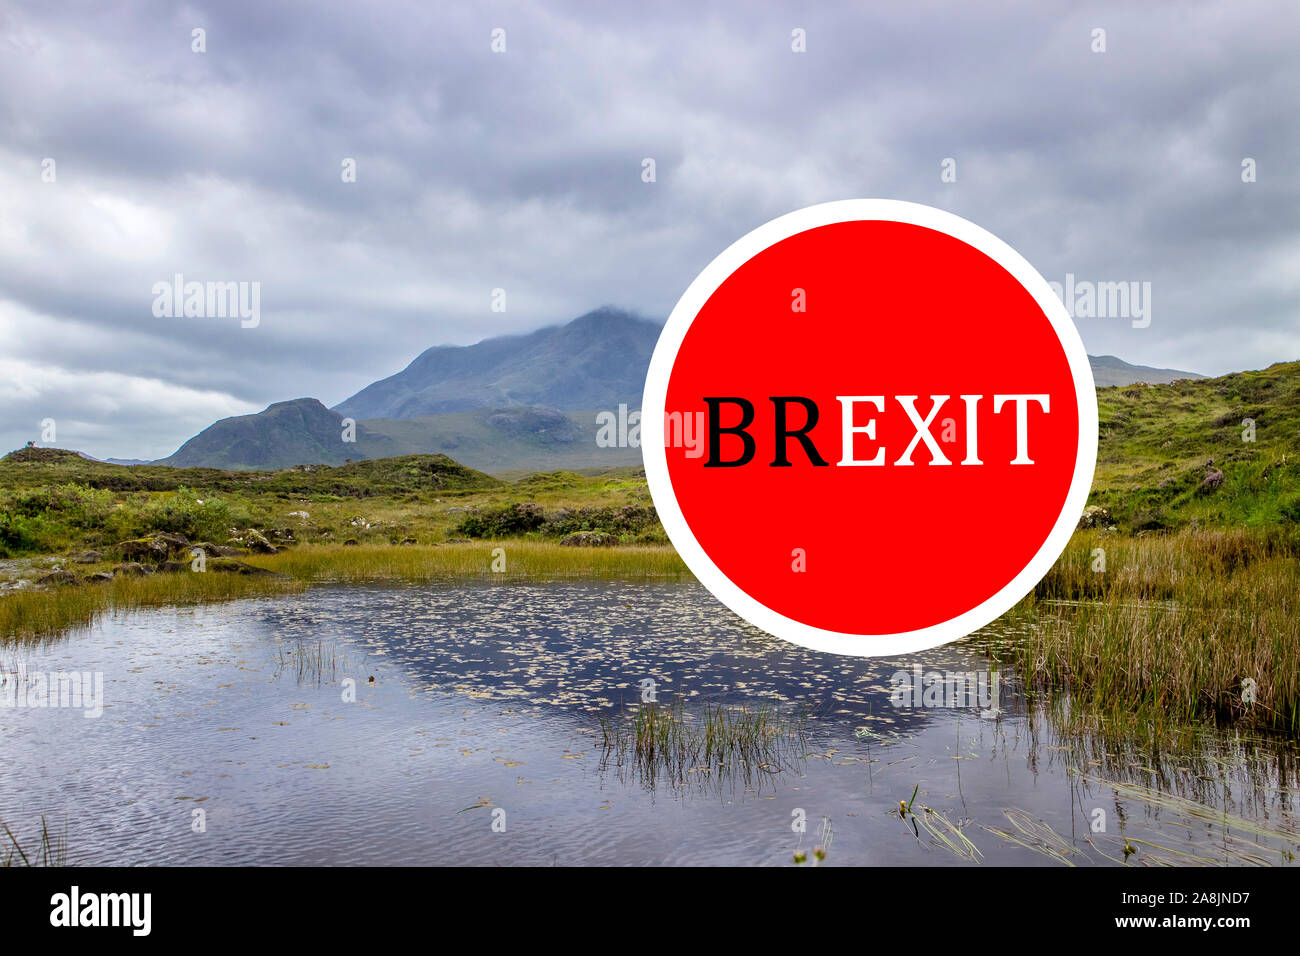 BREXIT in Scotland/Ireland UK concept. Scottish Highland nature background with red warning sign. Stock Photo